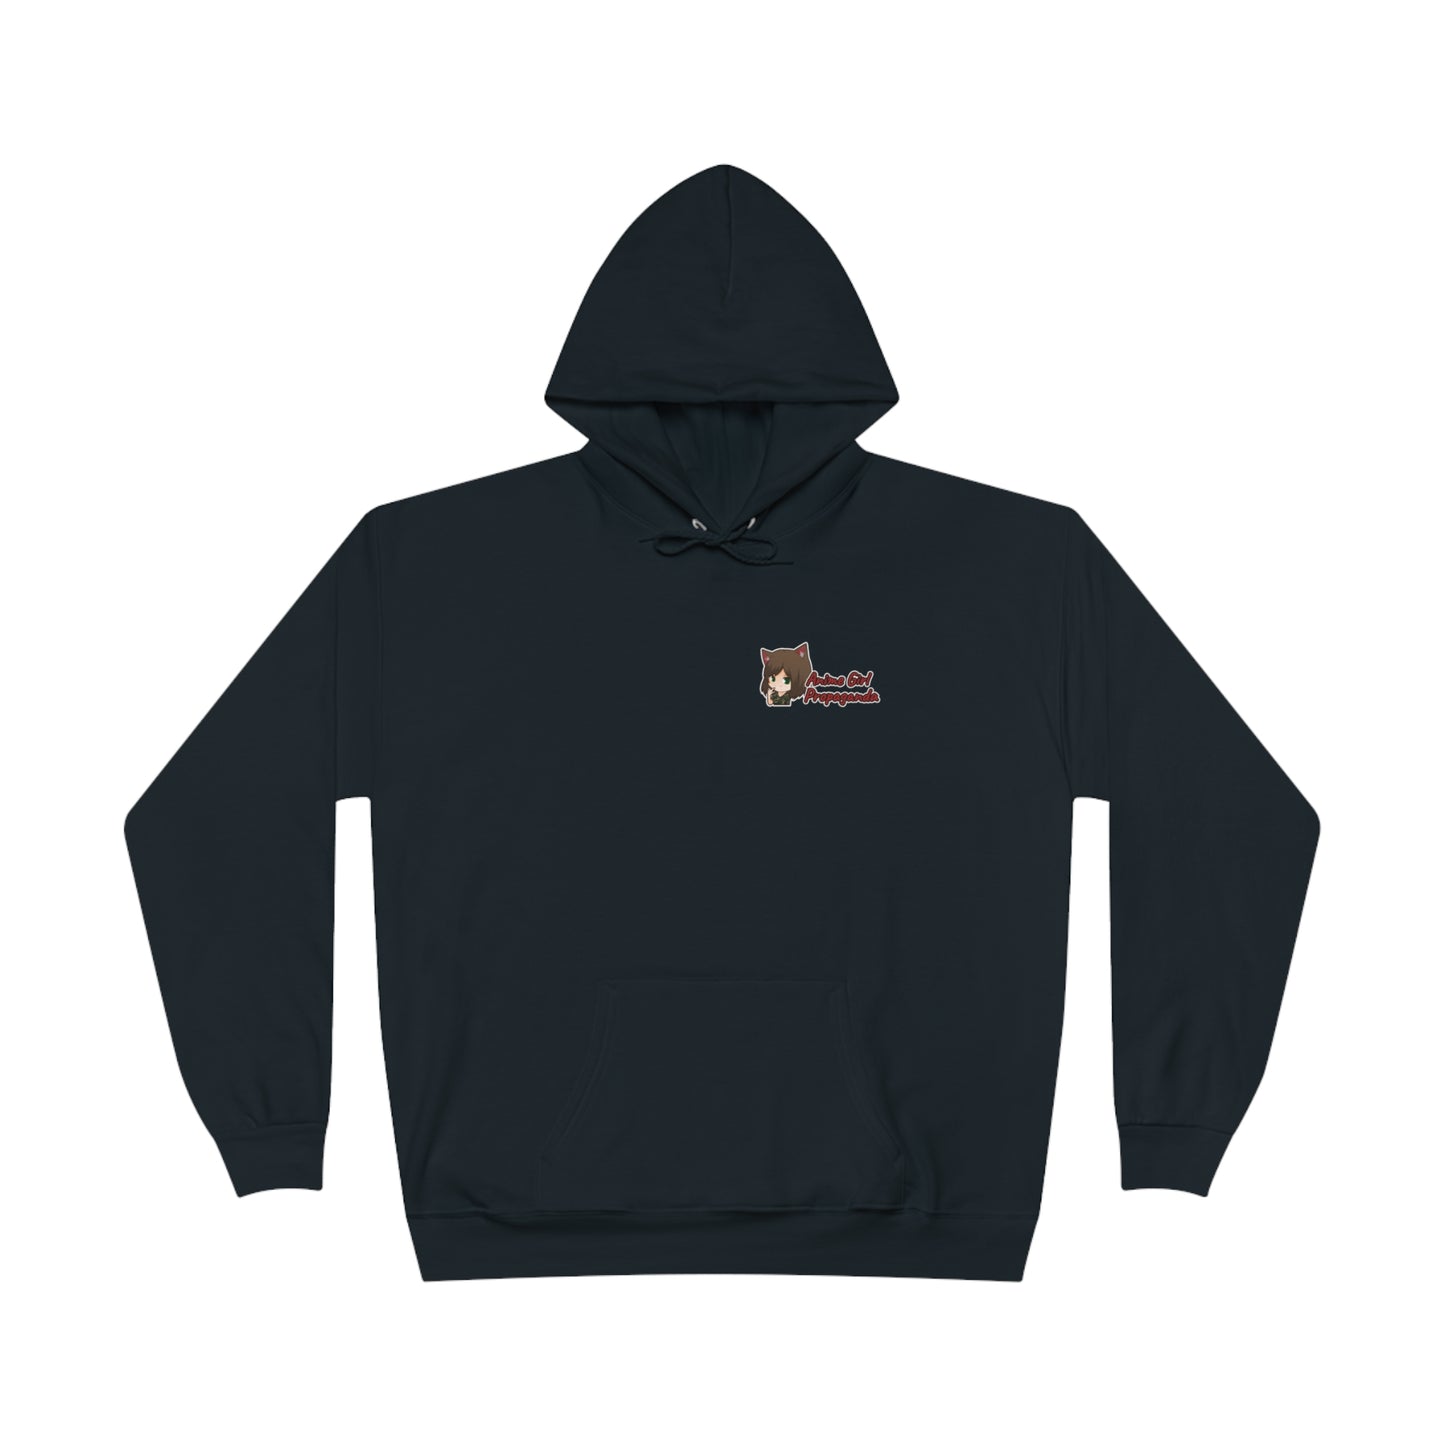 Join the Navy Hoodie